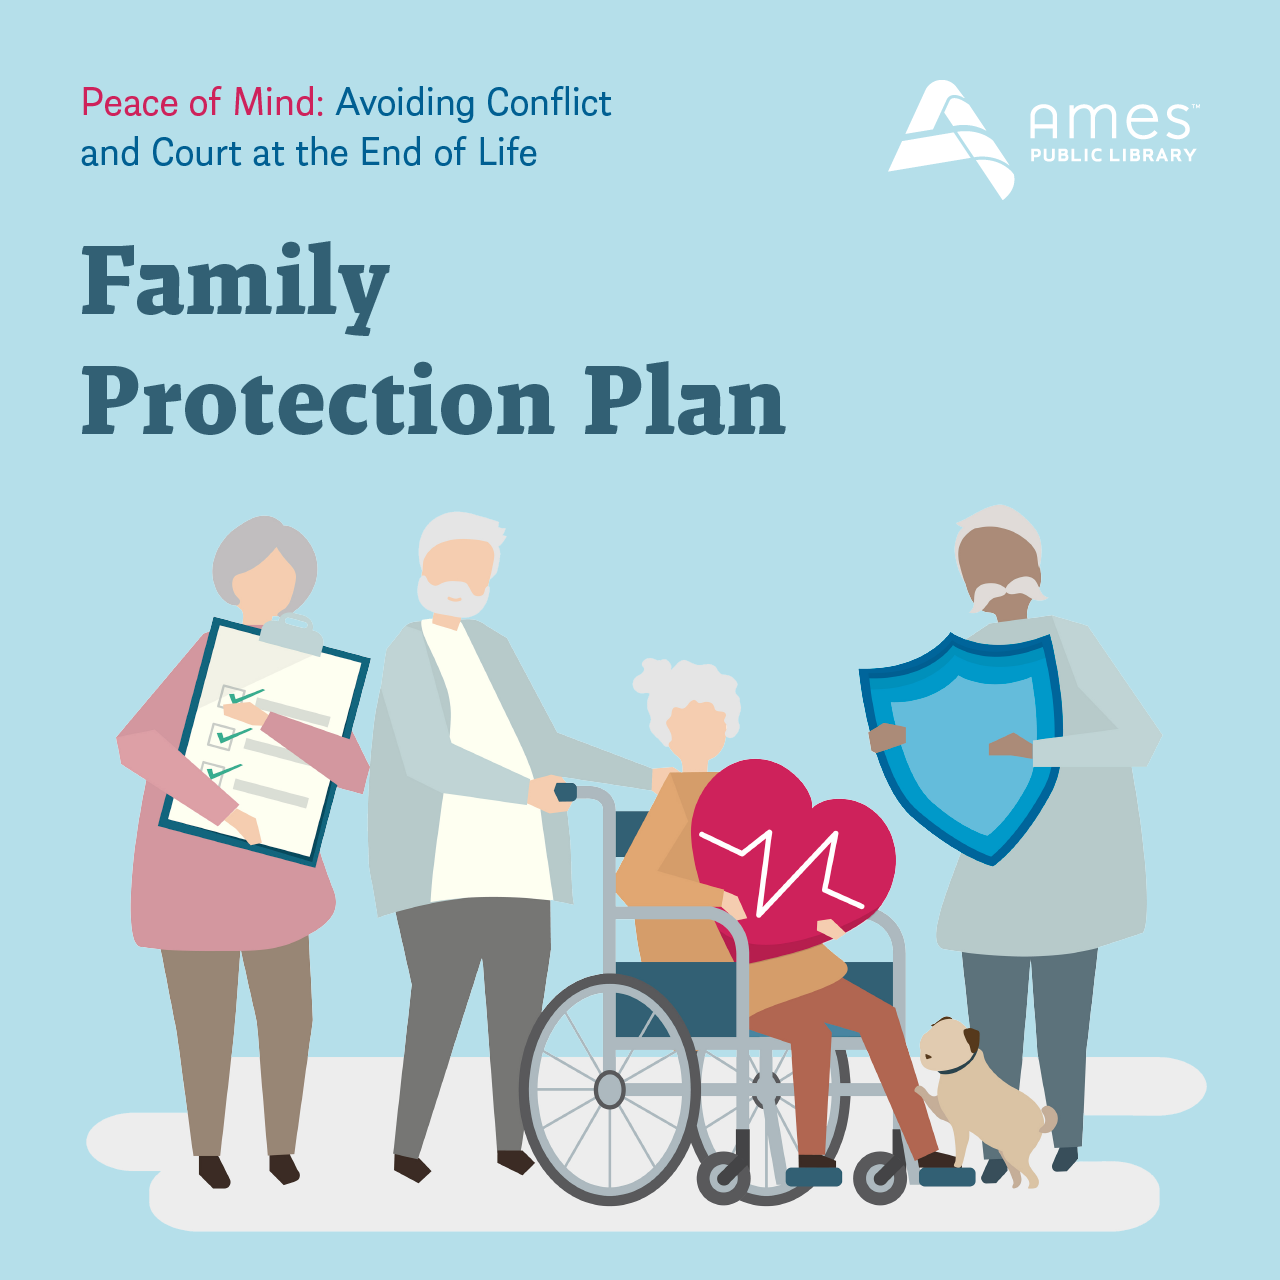 Peace of Mind: Avoiding Conflict & Court at the End of Life. Family Protection Plan